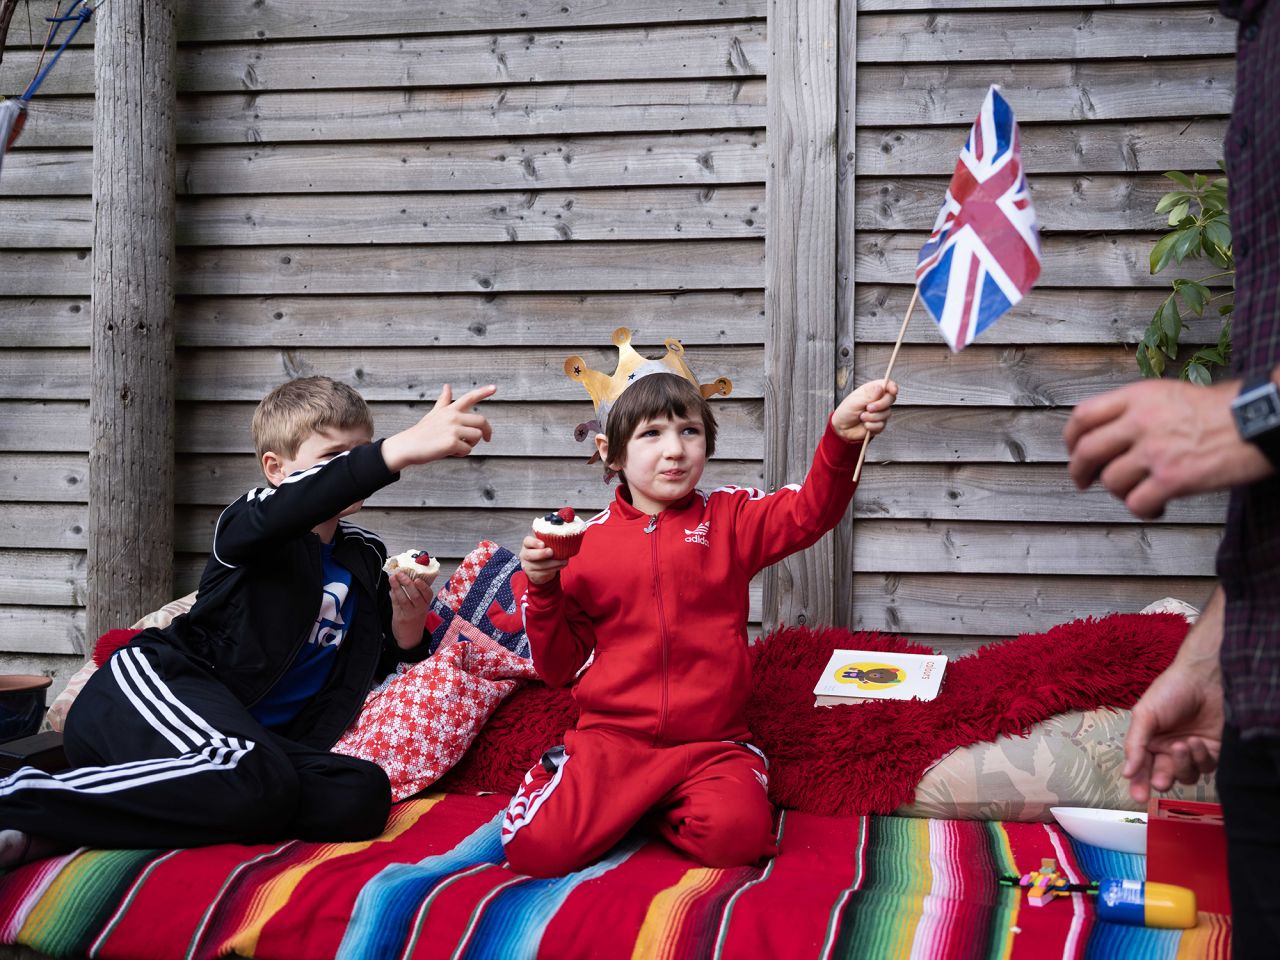 Sasha, 5, holds a Union Flag while eating a cupcake at a street party in North London.